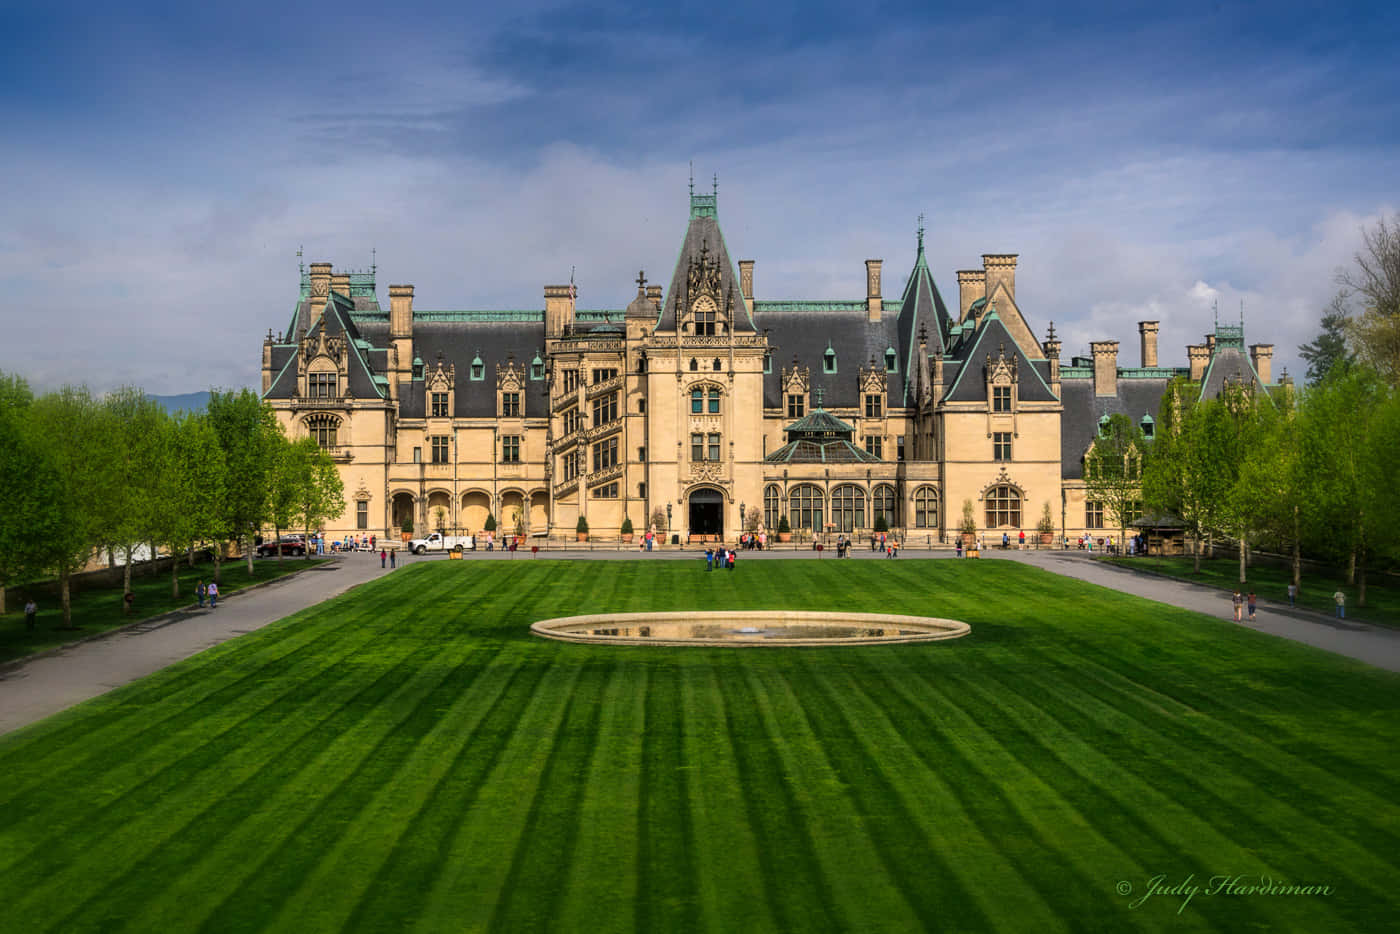 Experience history and charm at the luxurious Biltmore Estate